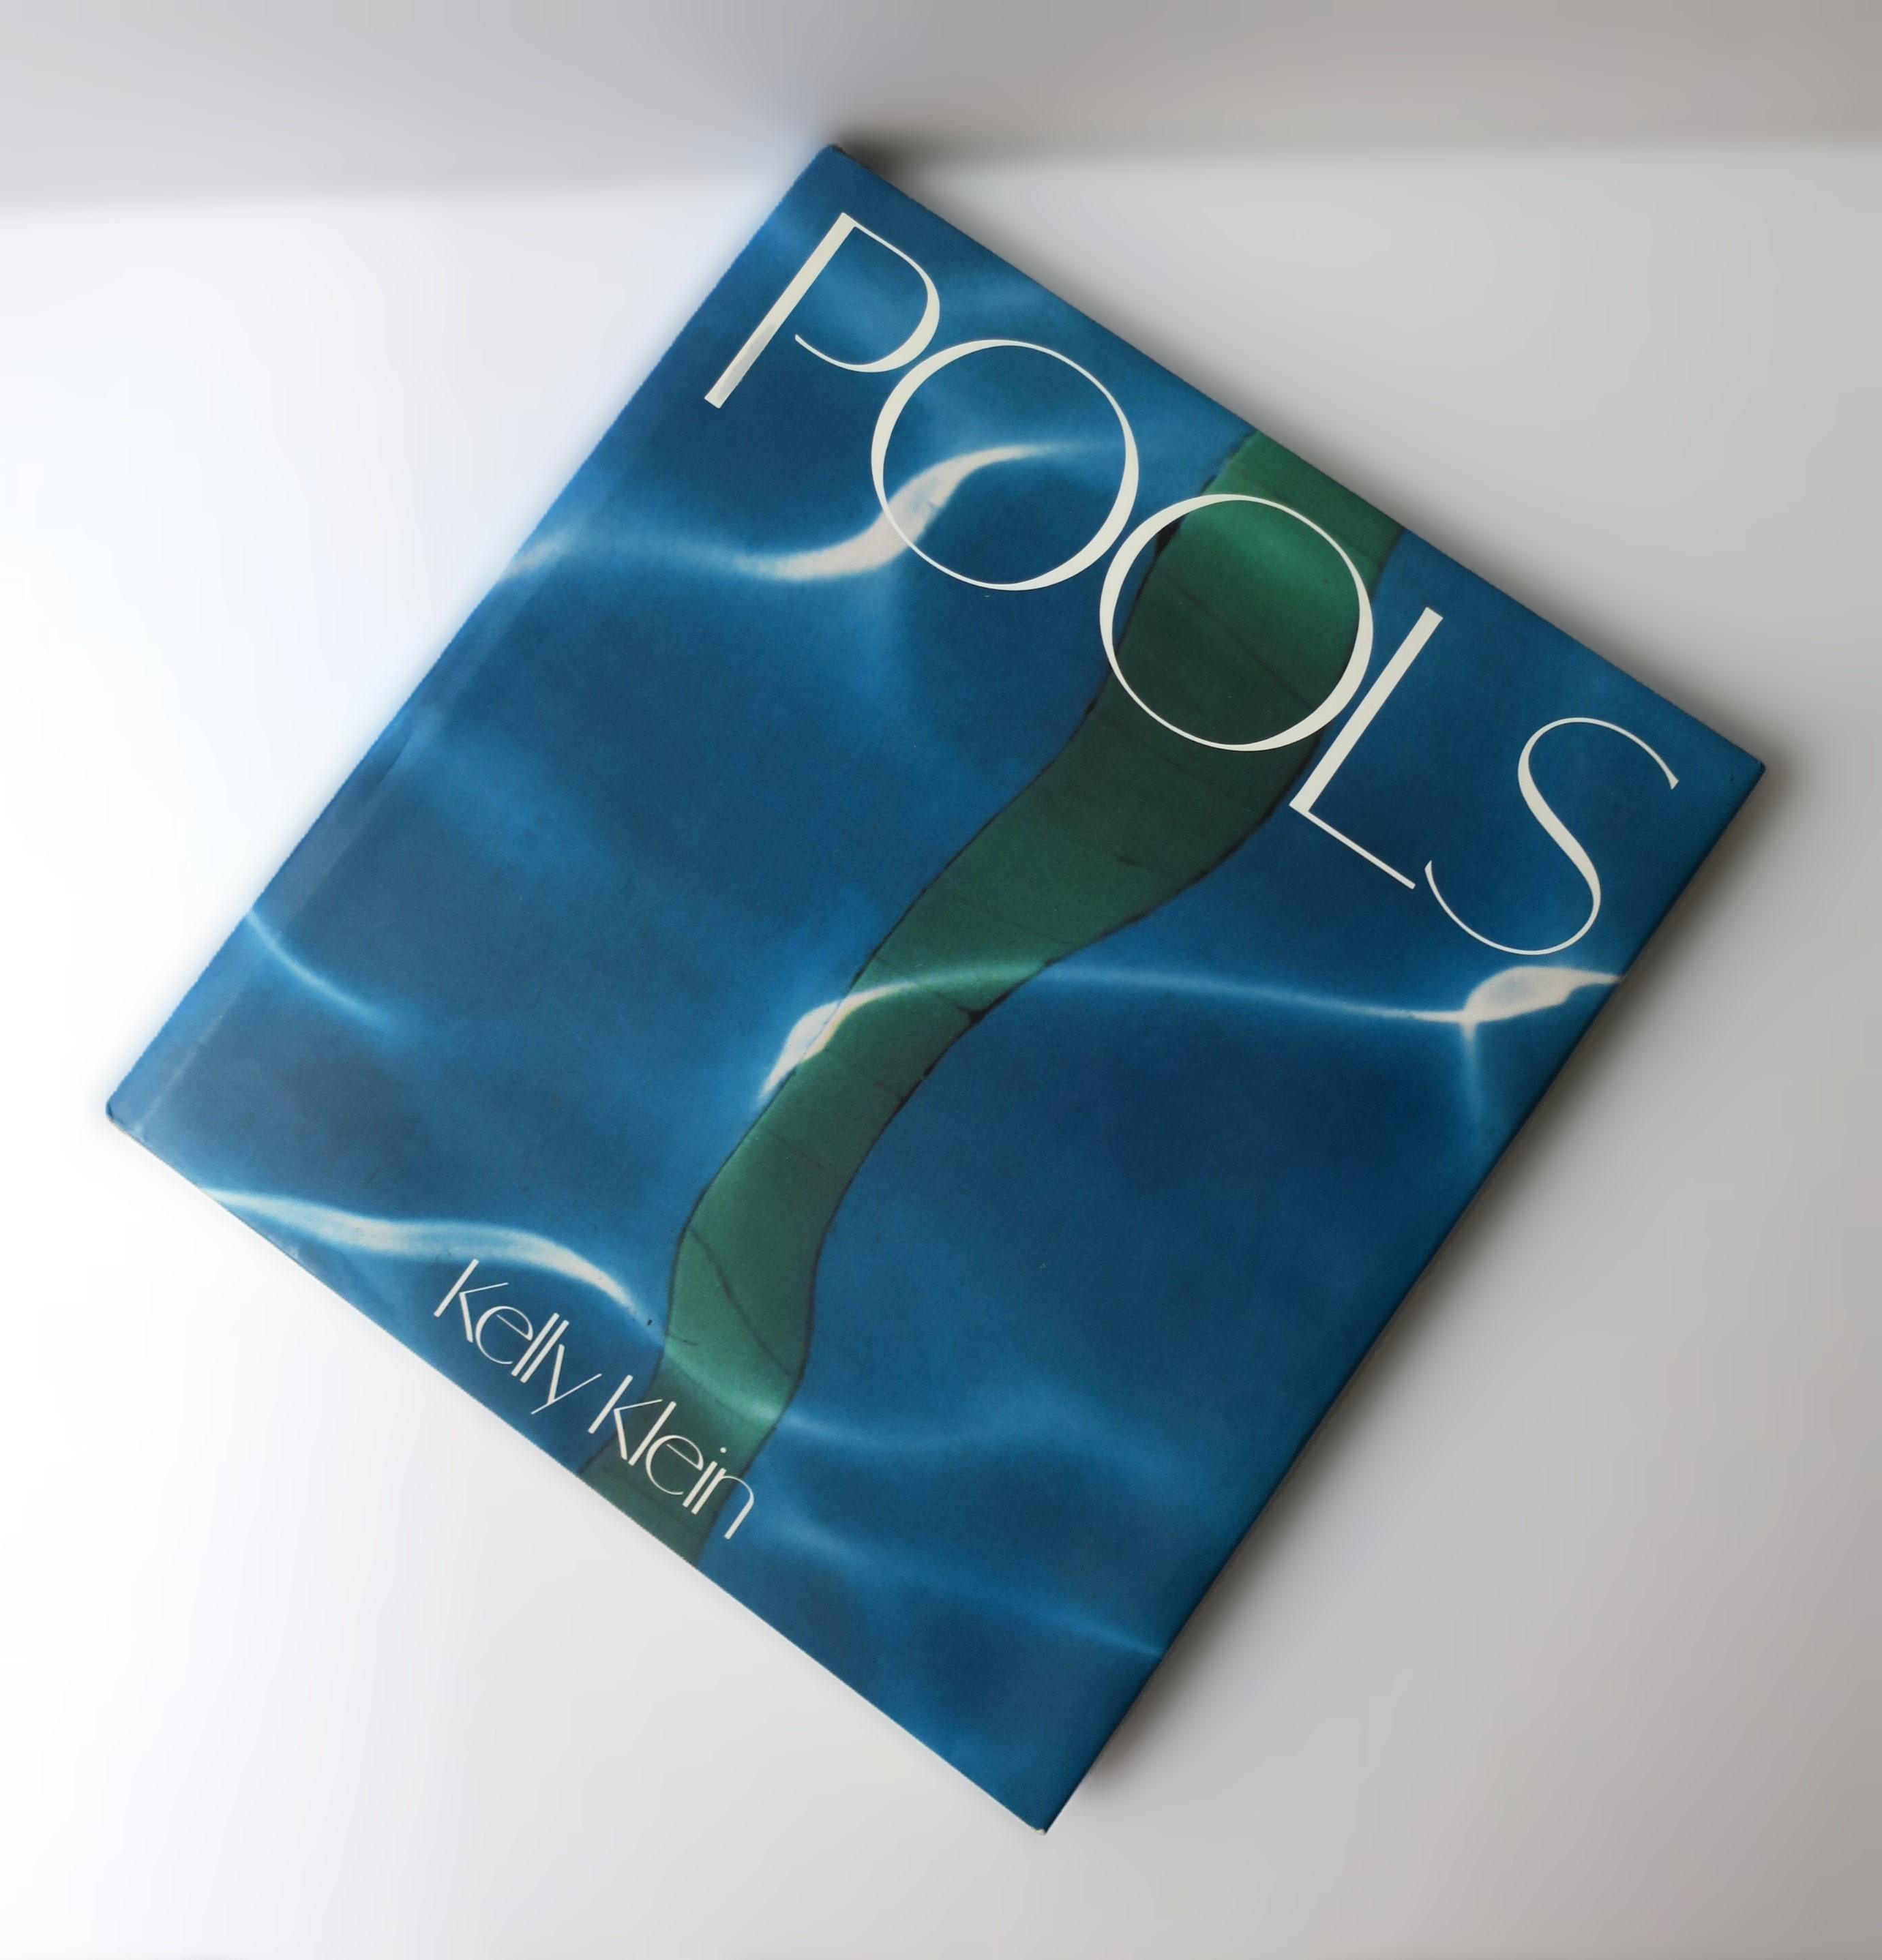 This beautiful book is first edition, 1992; An inspiring coffee table or library book by Kelly Klein, featuring iconic and unique photographs of swimming pools, in all their forms, from around the world. From Florida's Miami to North Africa's